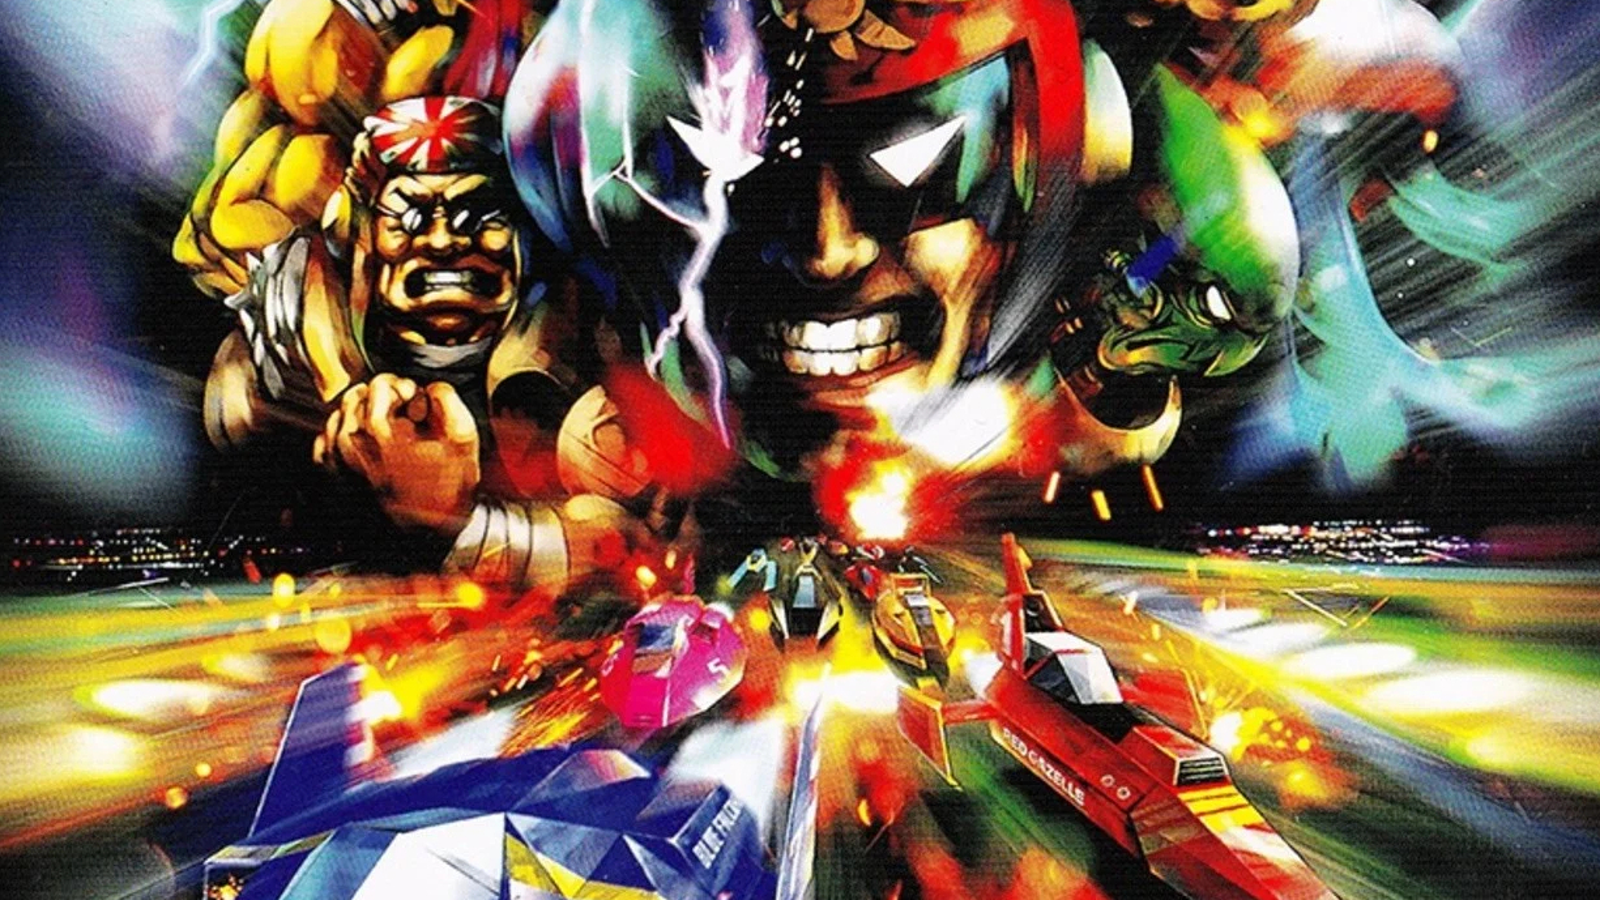 Nintendo is bringing F-Zero back as an online multiplayer game